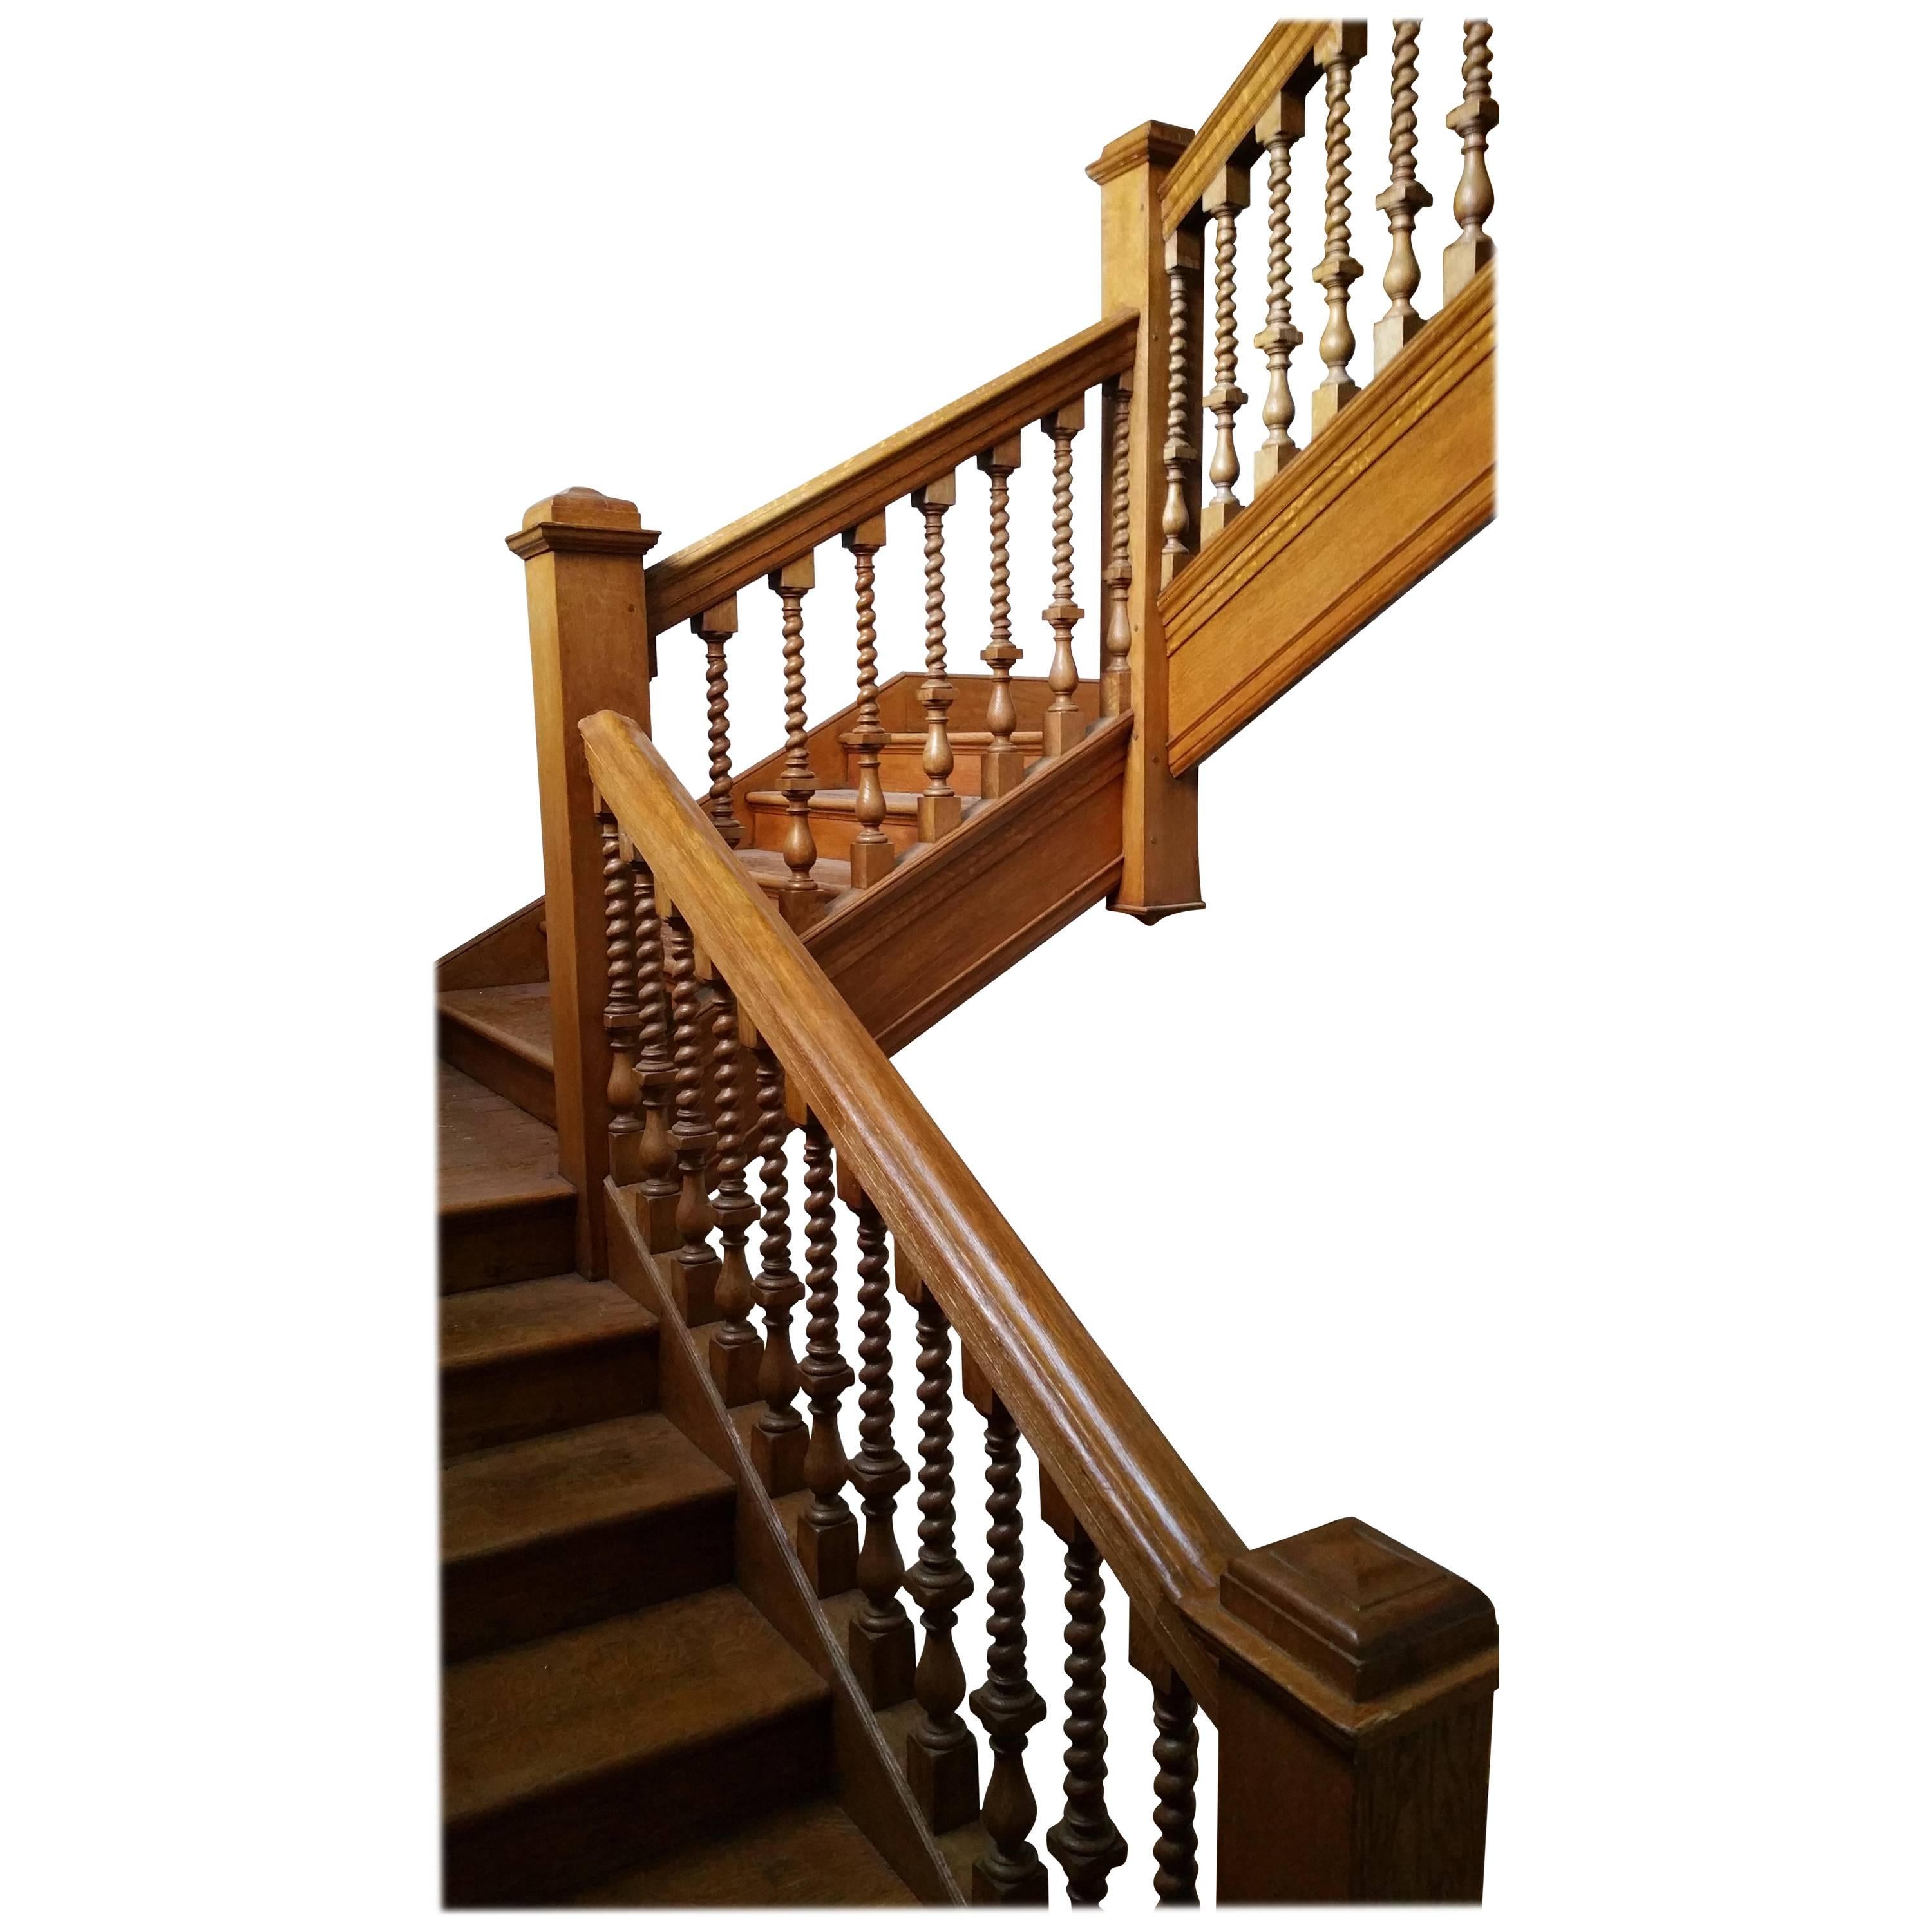 19th Century Oak Staircase Spindles and Handrail